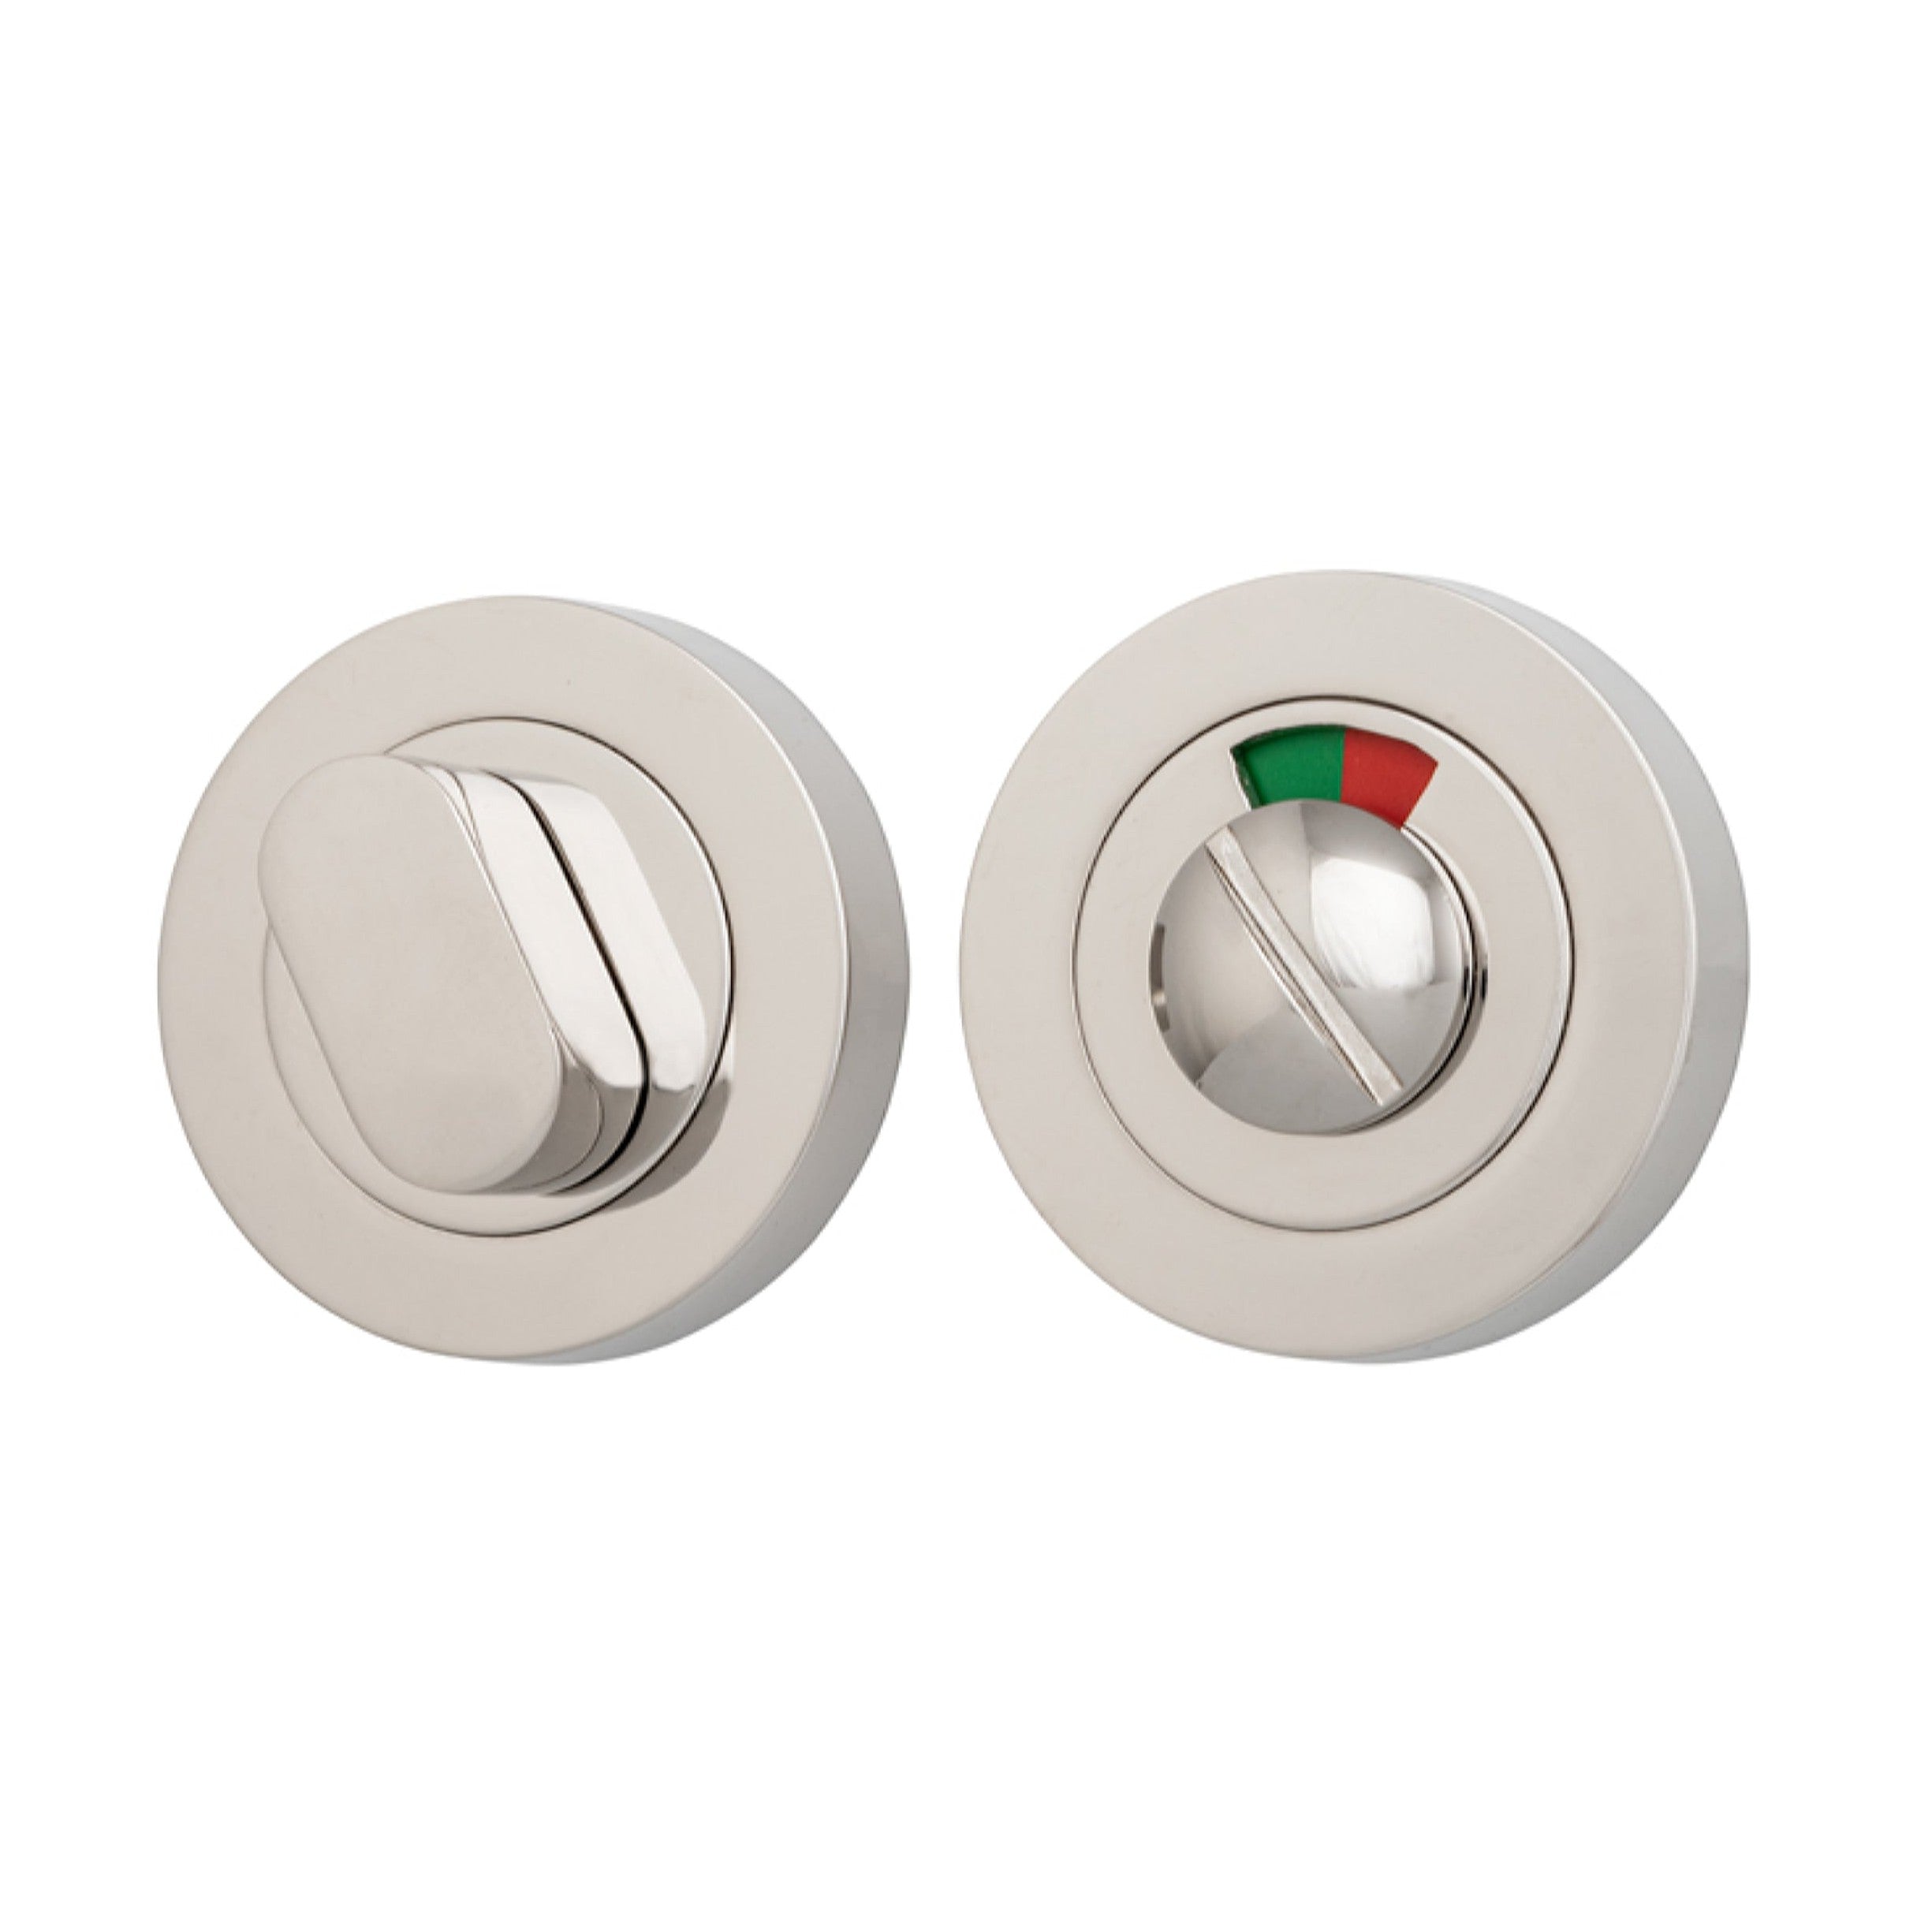 Iver Privacy Turn Oval with Indicator Concealed Fix Round Polished Nickel